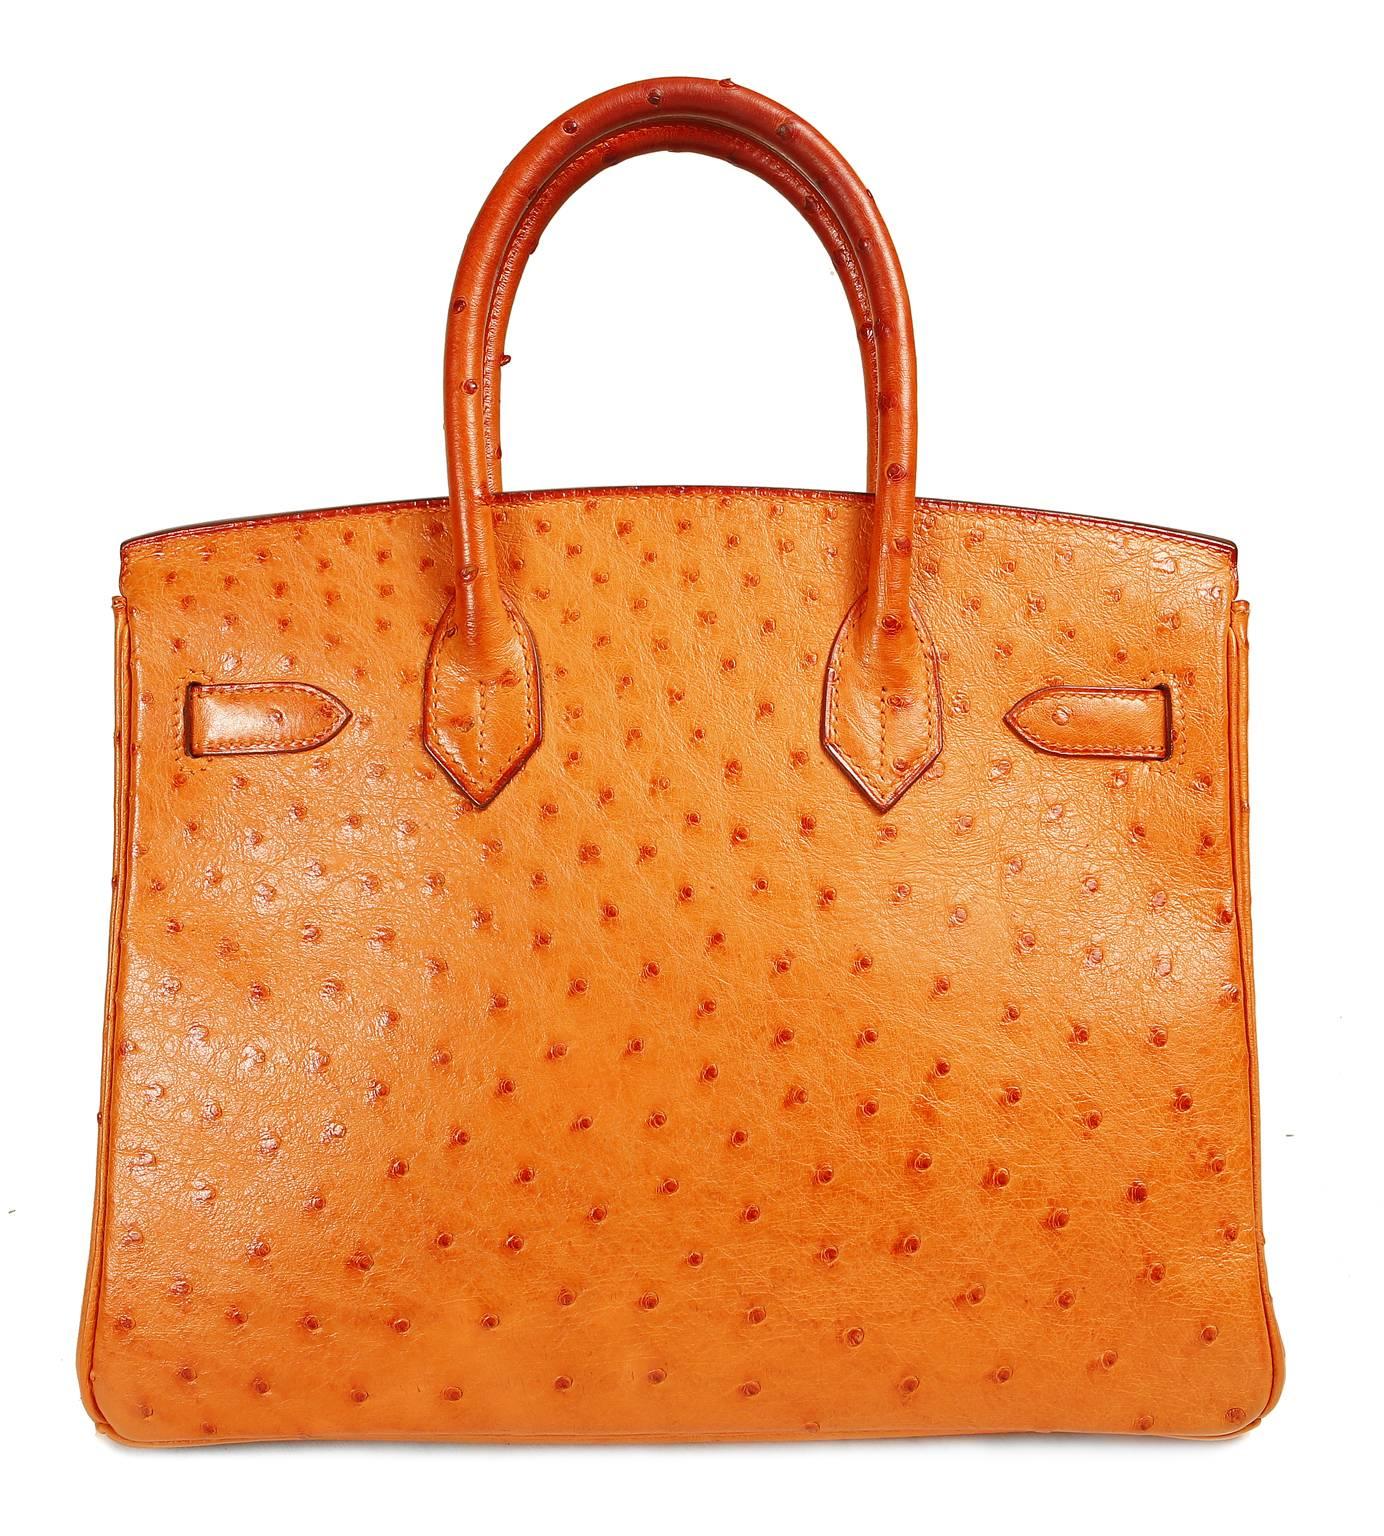 Hermès Orange Ostrich 30 cm Birkin is in pristine condition.  Hermès bags are considered the ultimate luxury item the world over.  Hand stitched by skilled craftsmen, wait lists of a year or more are commonplace.  This particular Birkin is in